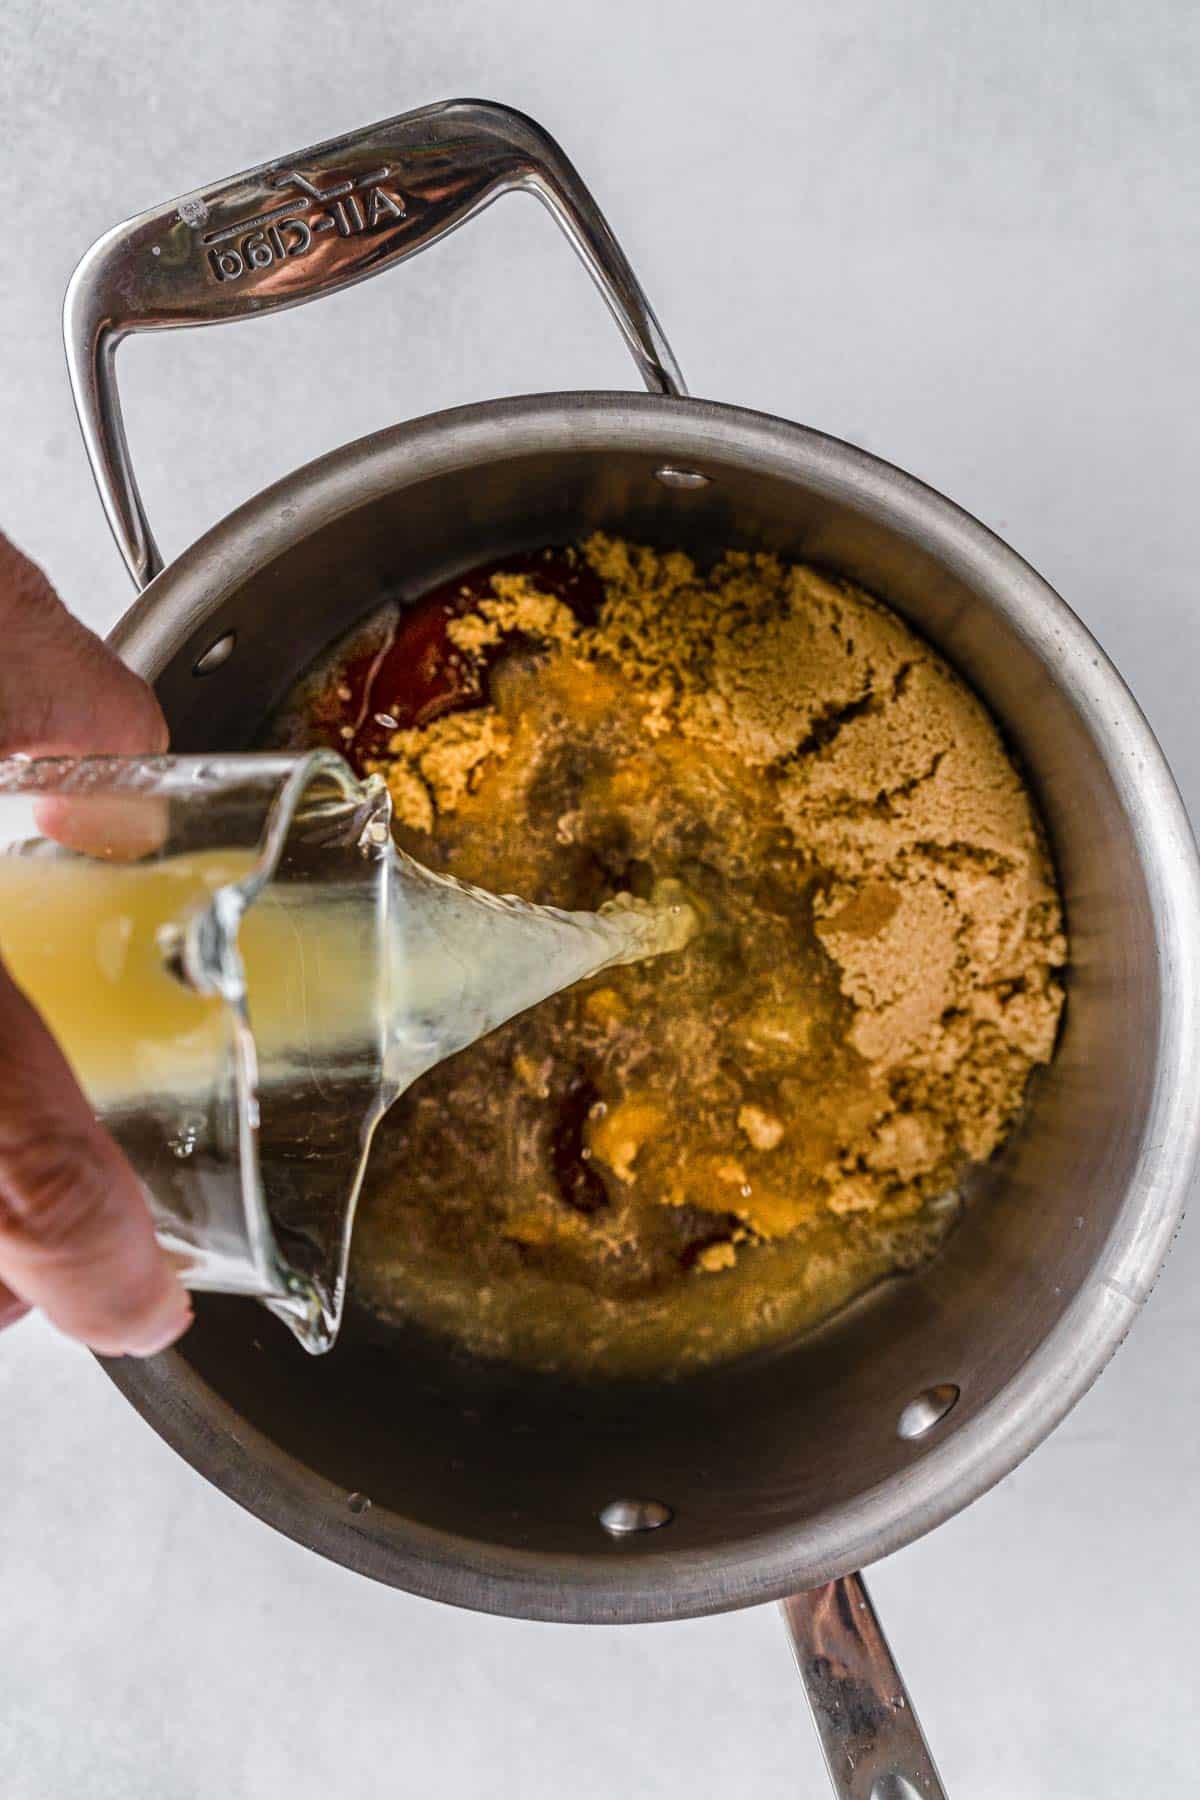 juice being poured into a stainless steel pot with brown sugar mixture.